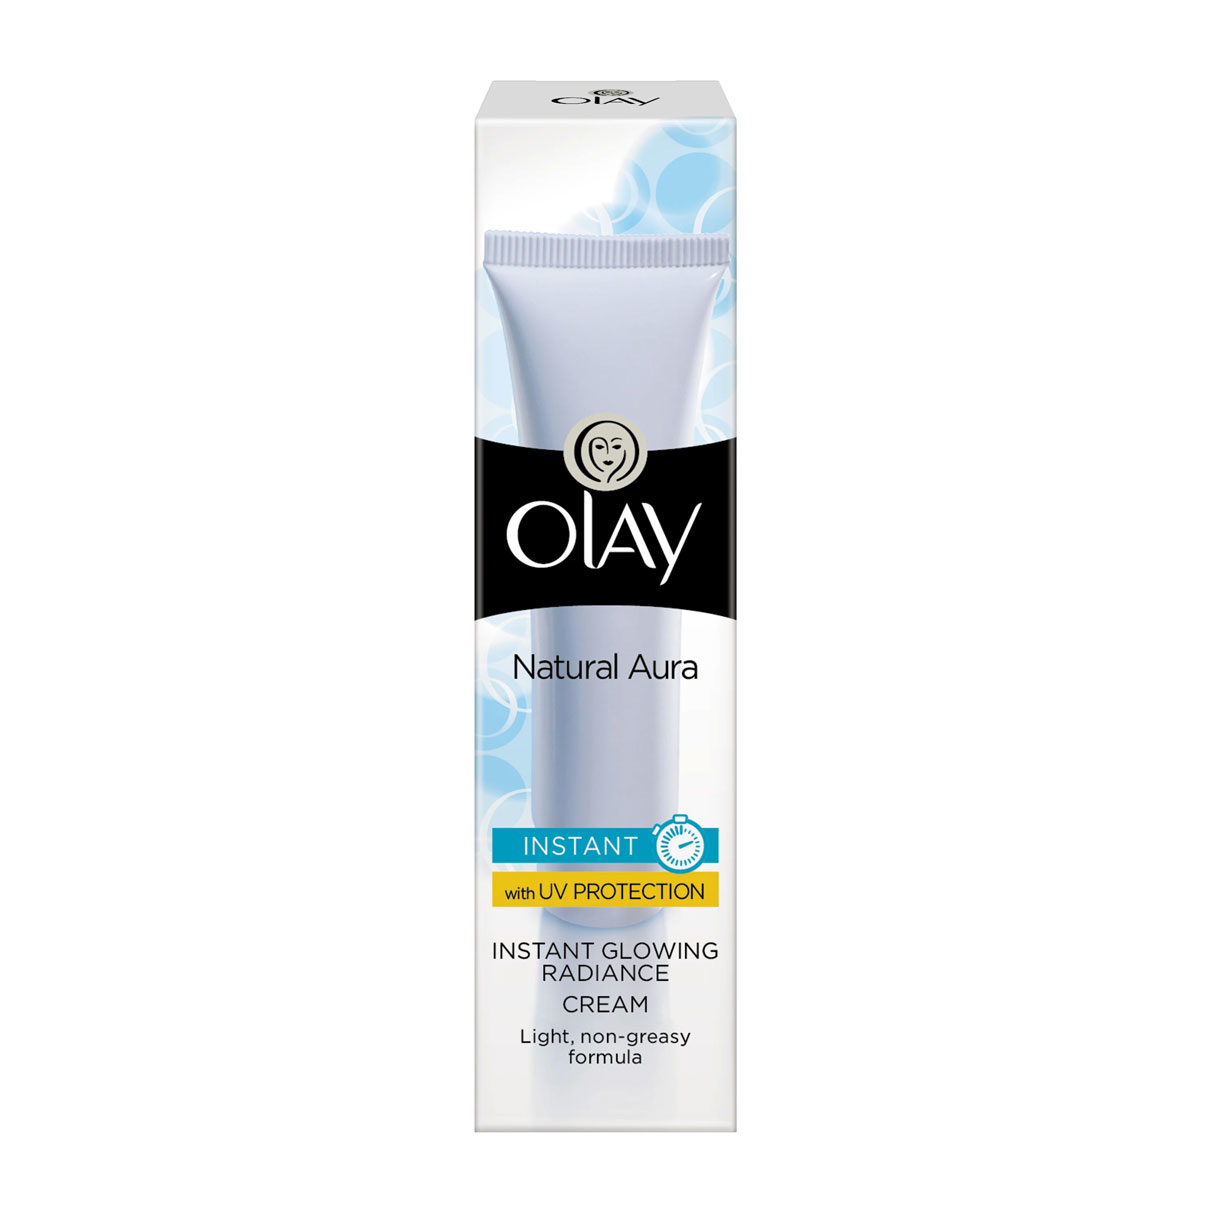 PDP IN - Olay Natural Aura 3-IN-1 Fairness UV Protection SI1